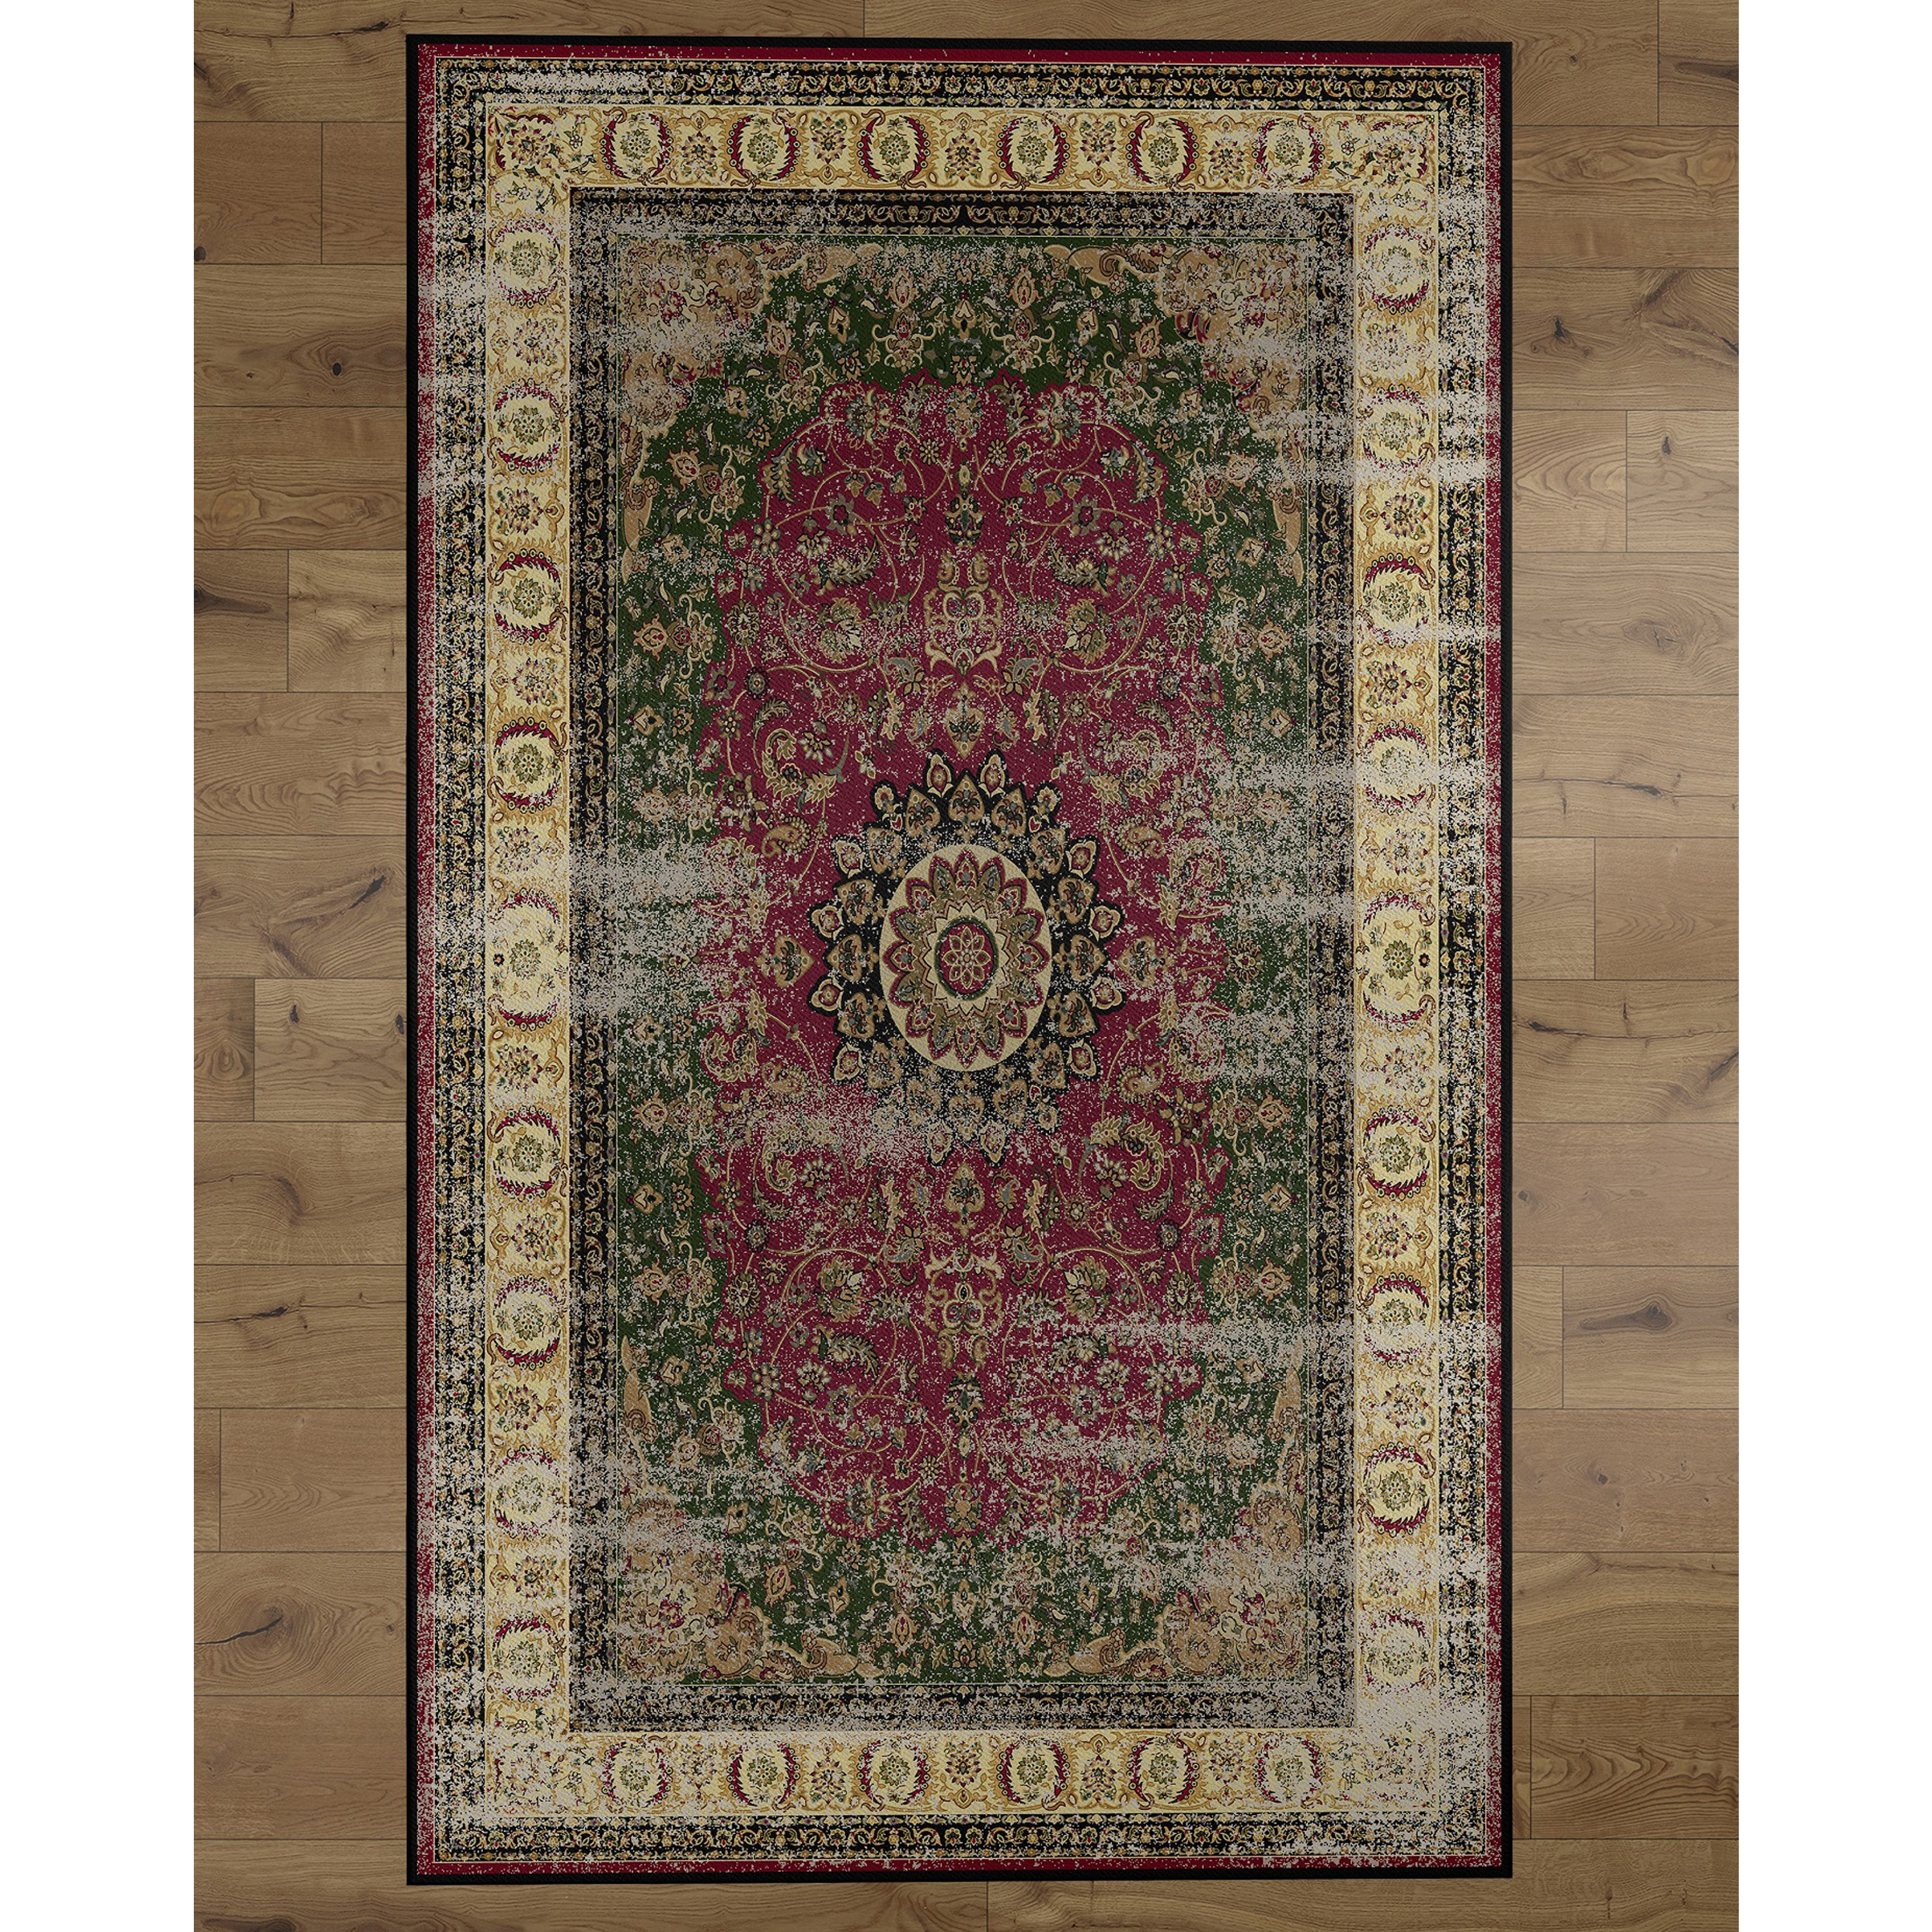 Deerlux Traditional Oriental Persian Style Living Room Area Rug With Nonslip Backing, Classic Pink - 8x10